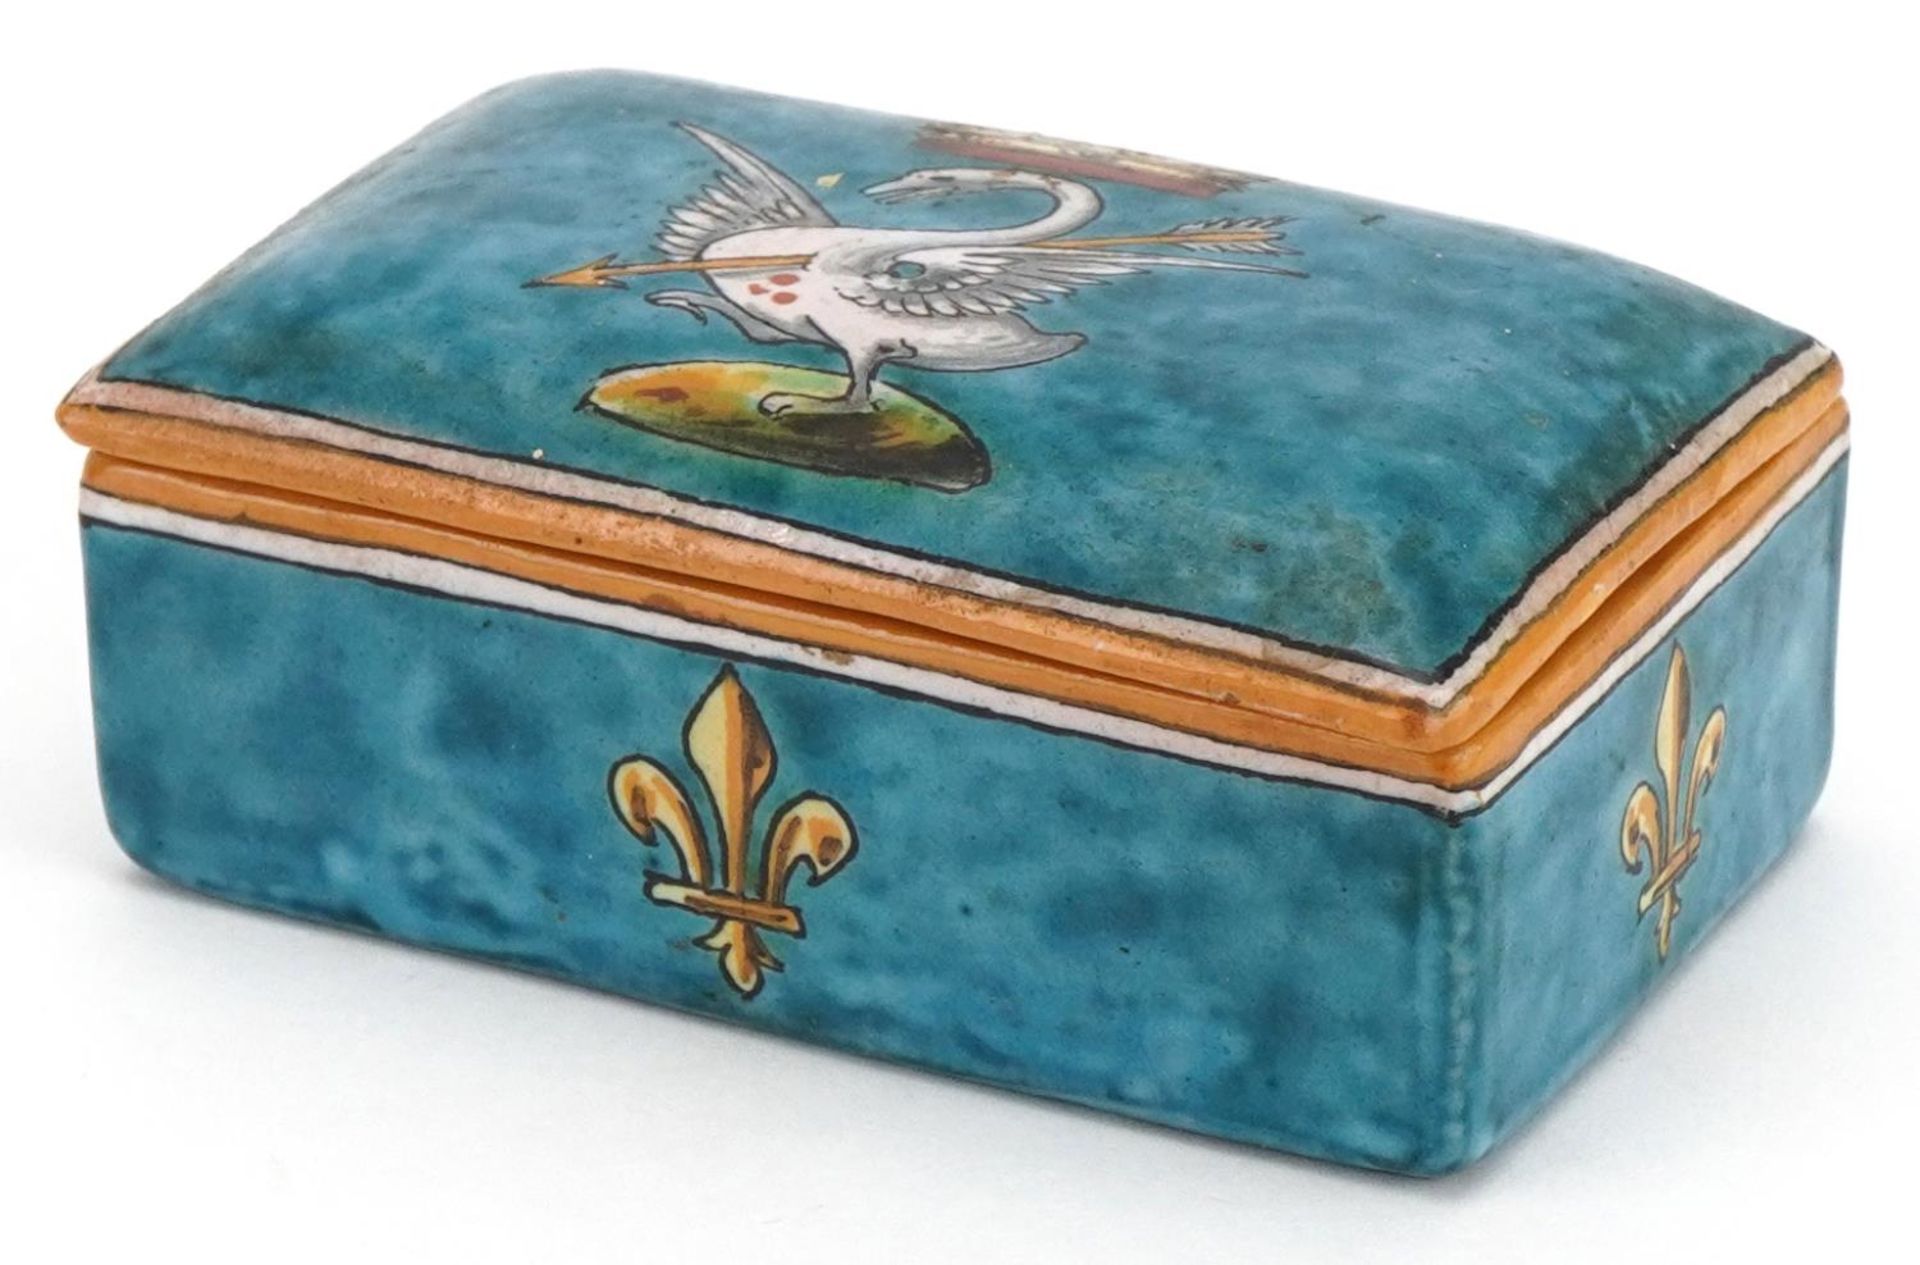 Ulysse Blois, 19th century French faience glazed pottery box and cover hand painted with fleur de